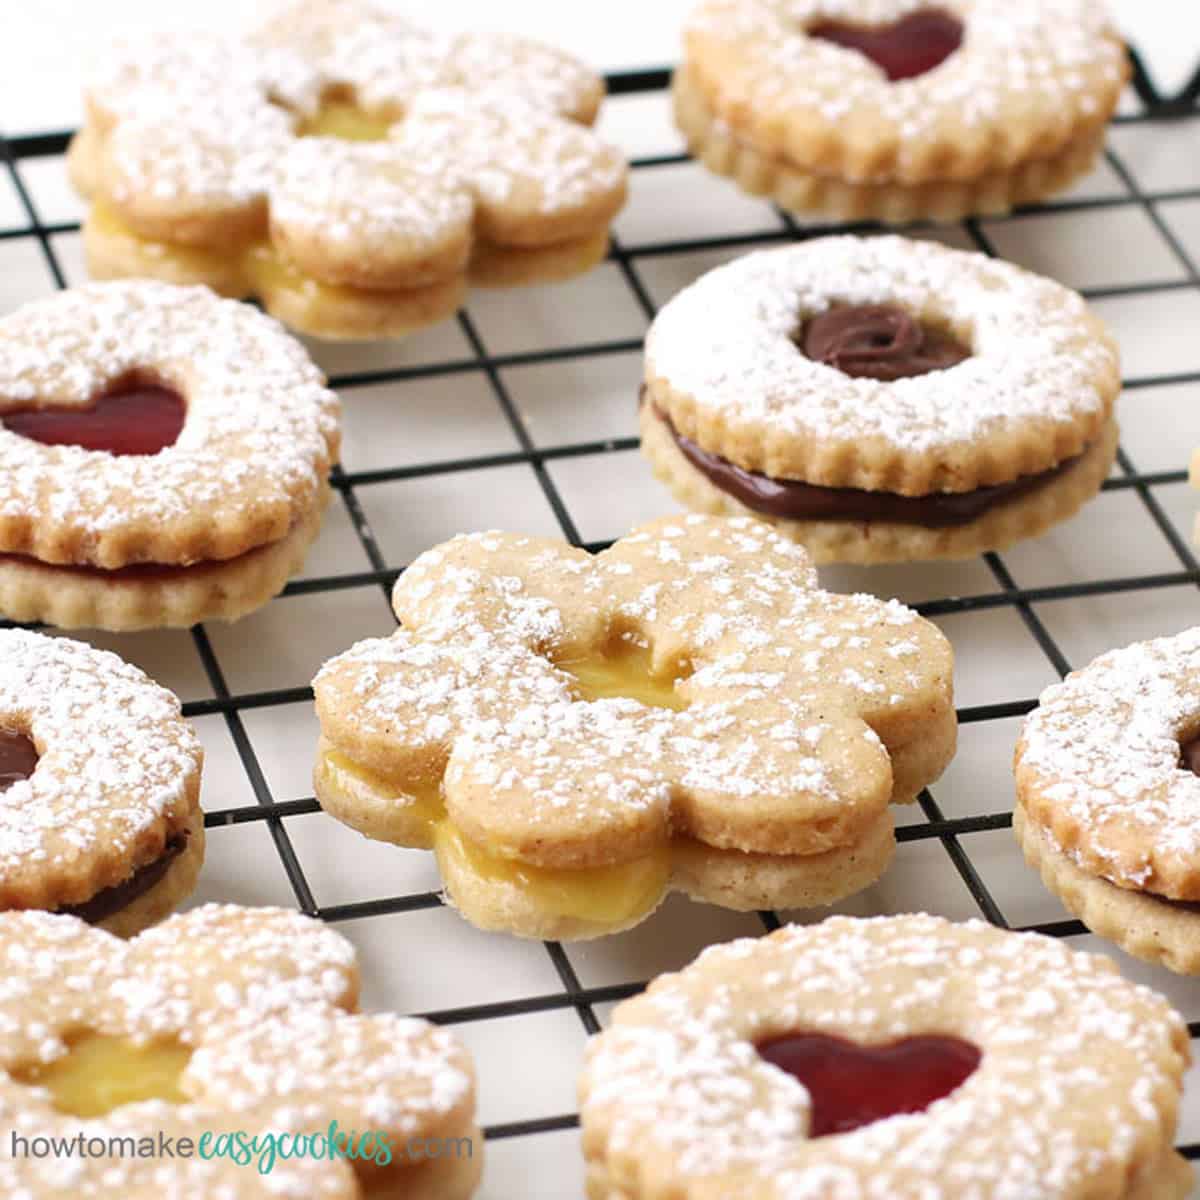 Heart-shaped, daisy-shaped, and round Linzer Cookies filled with raspberry jam, lemon curd, and chocolate hazelnut spread.